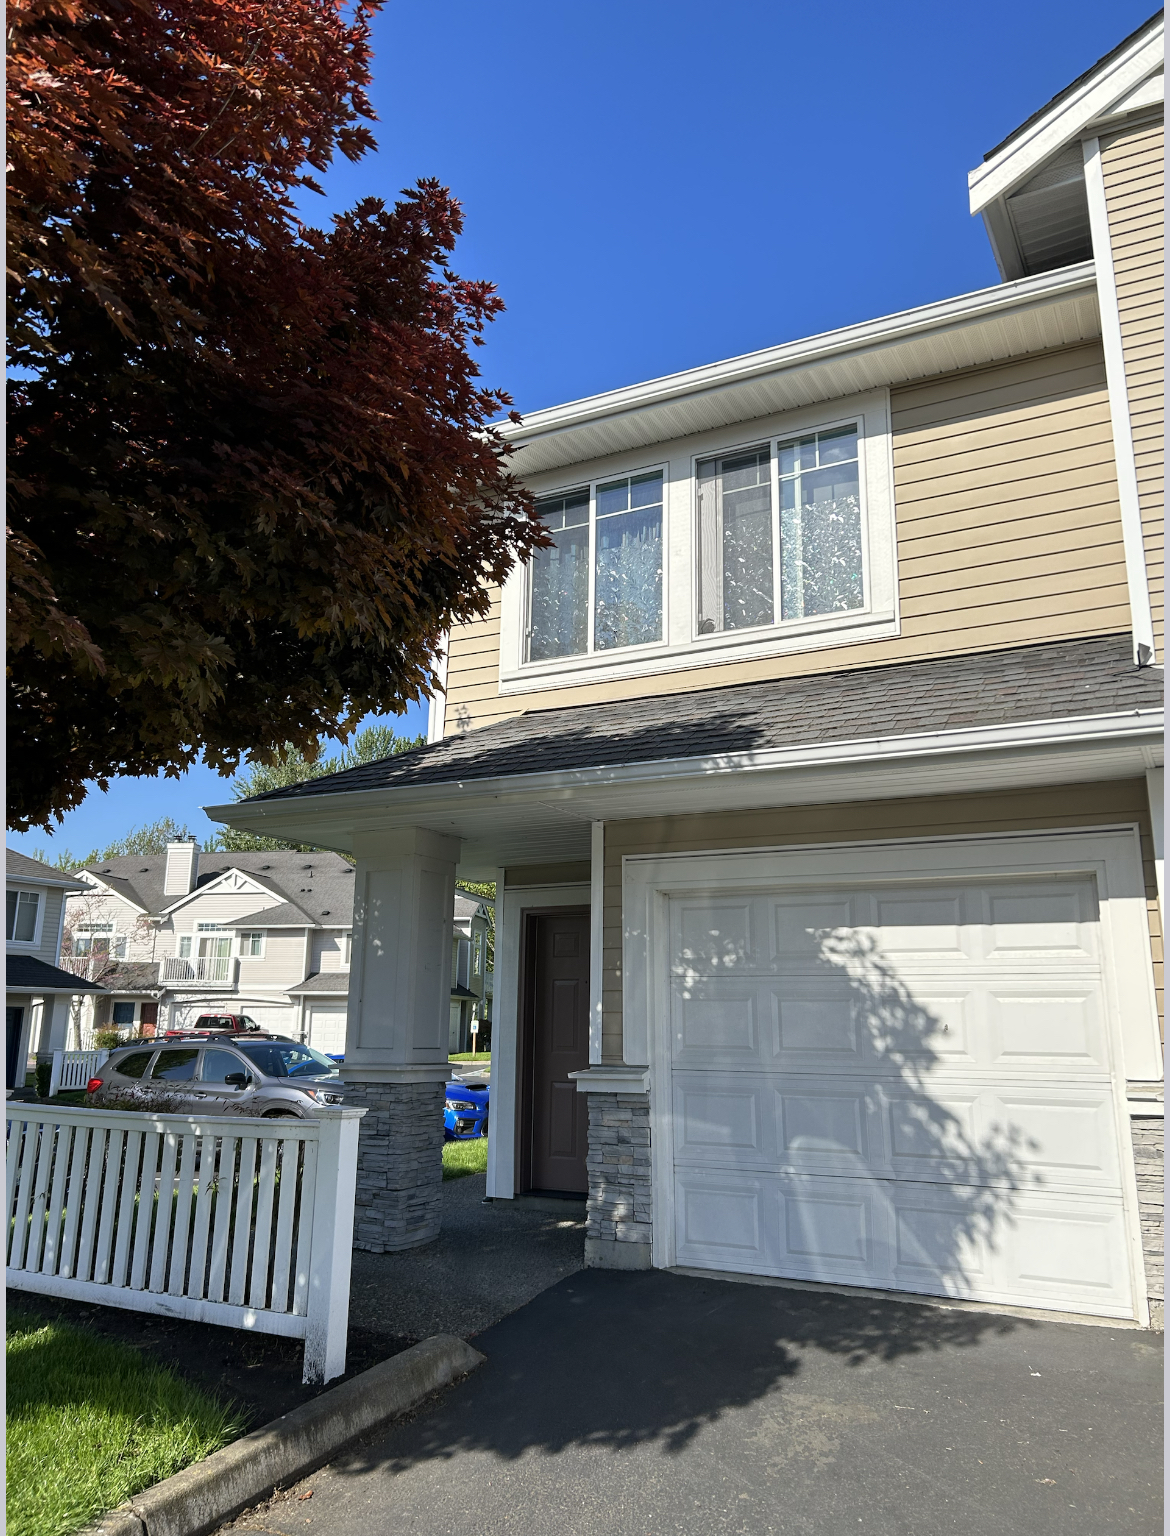 23527 54th Ave S, Kent, WA 98032 – 2bd/2ba Condo with garage in West Bay at The Lakes in Kent – $2390/month